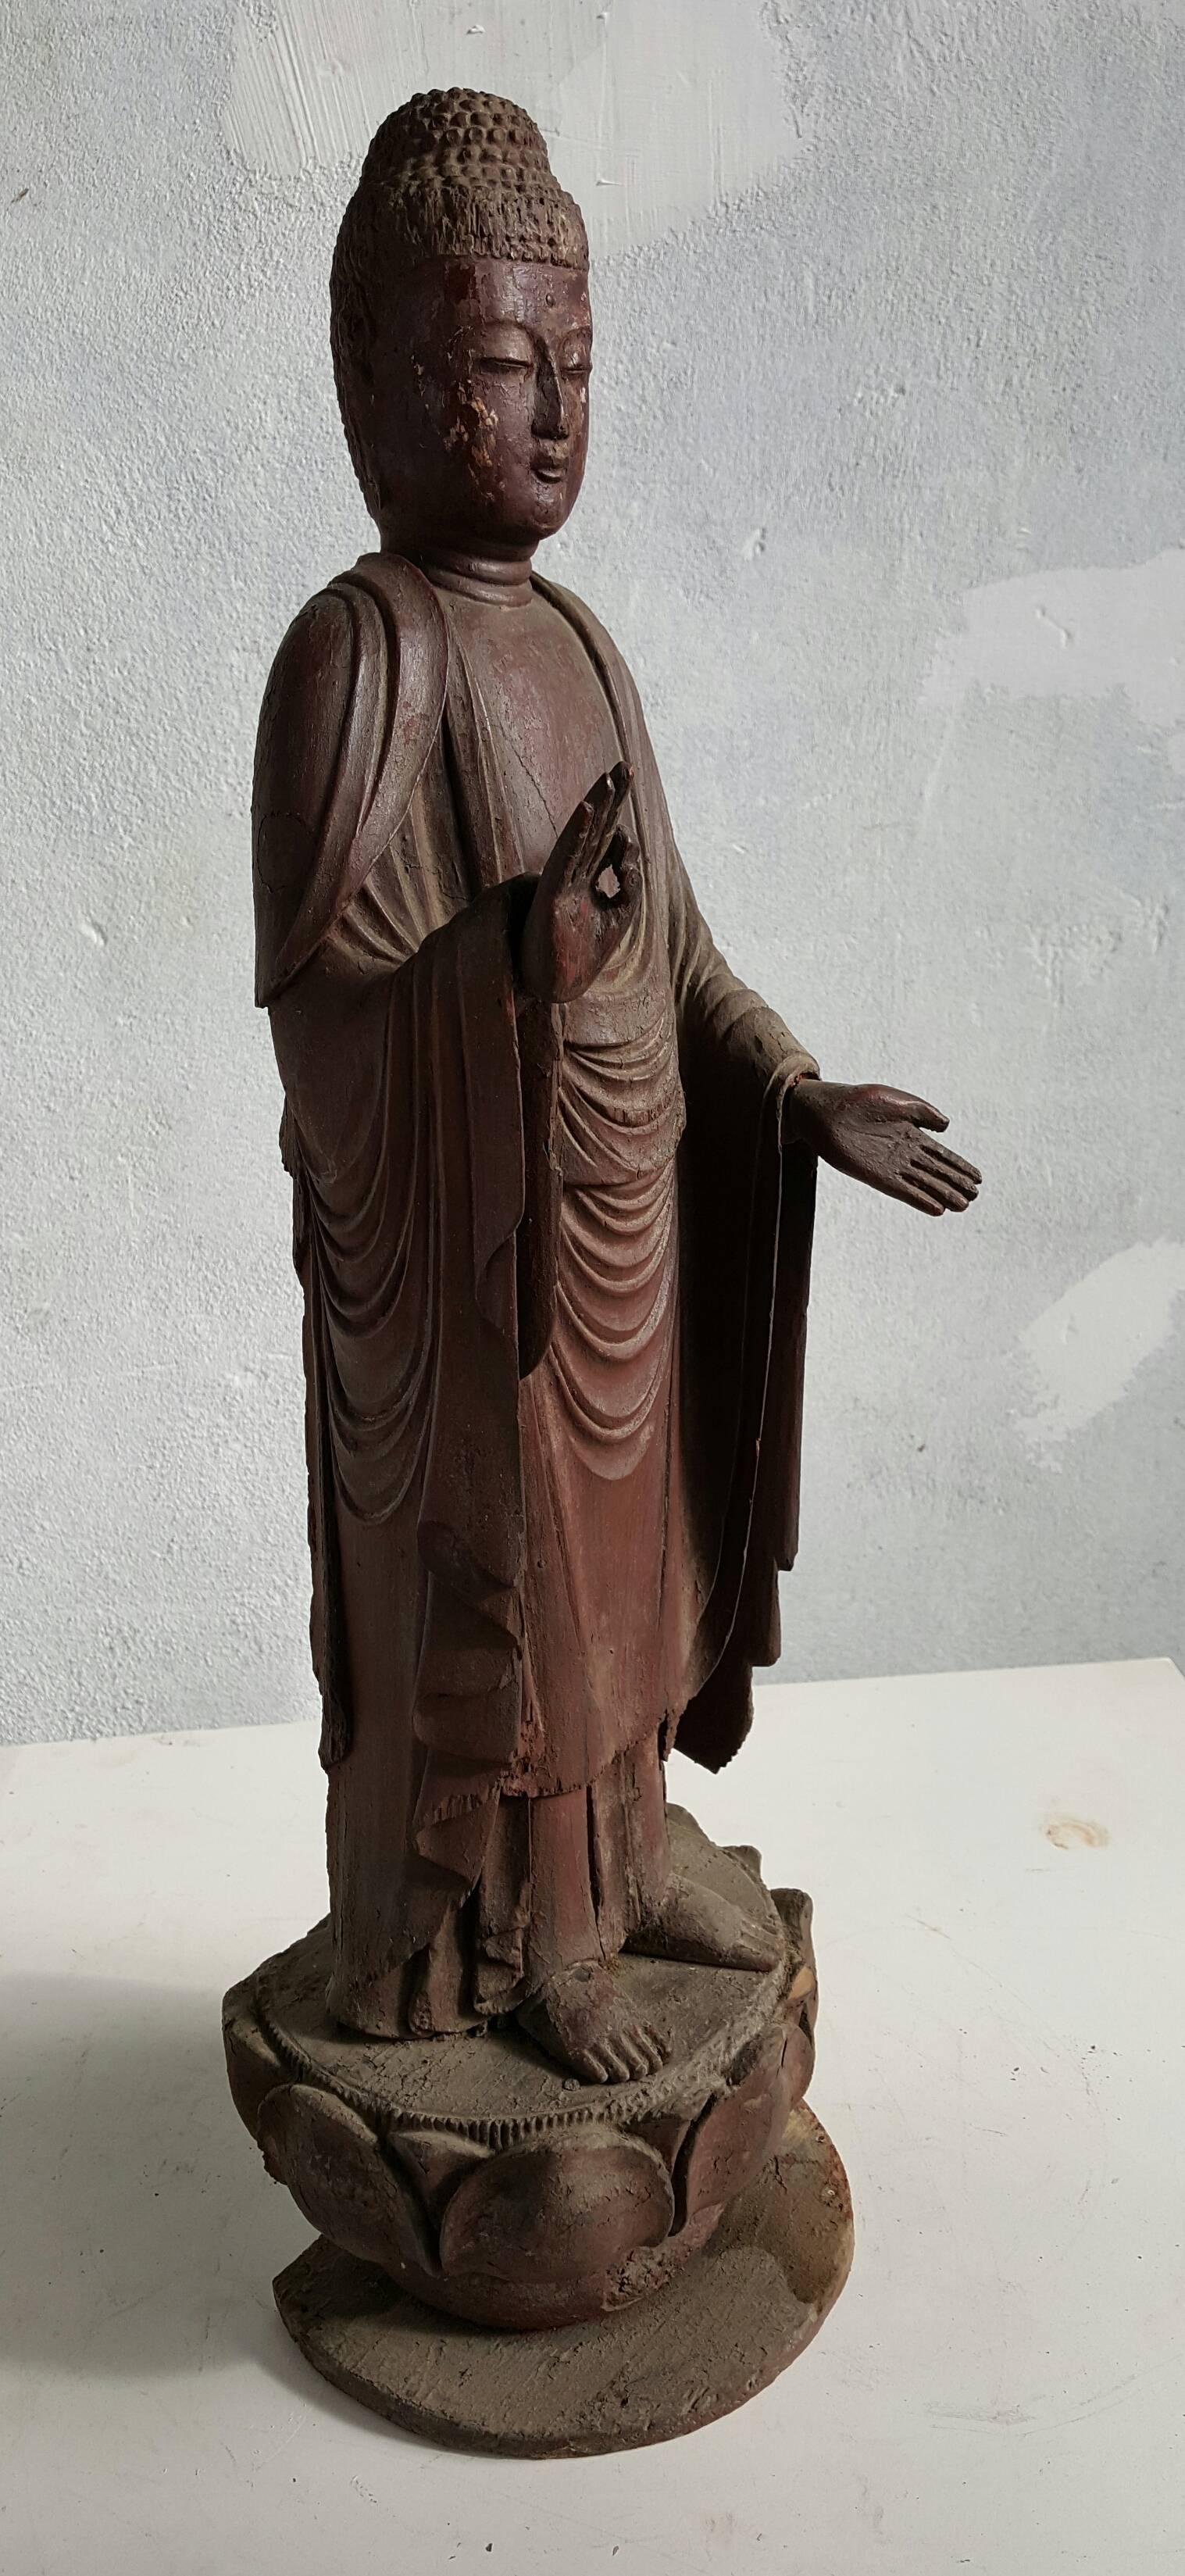 A Japanese carved wood Buddha figure Amida Nyorai (Buddha Amitabha),Mid 19th century, Cypress wood with traces of pigment and lacquer gold leaf. Standing on a lotus Zishi . This masterpiece is exquisitely caved. From the draping of the robes and the